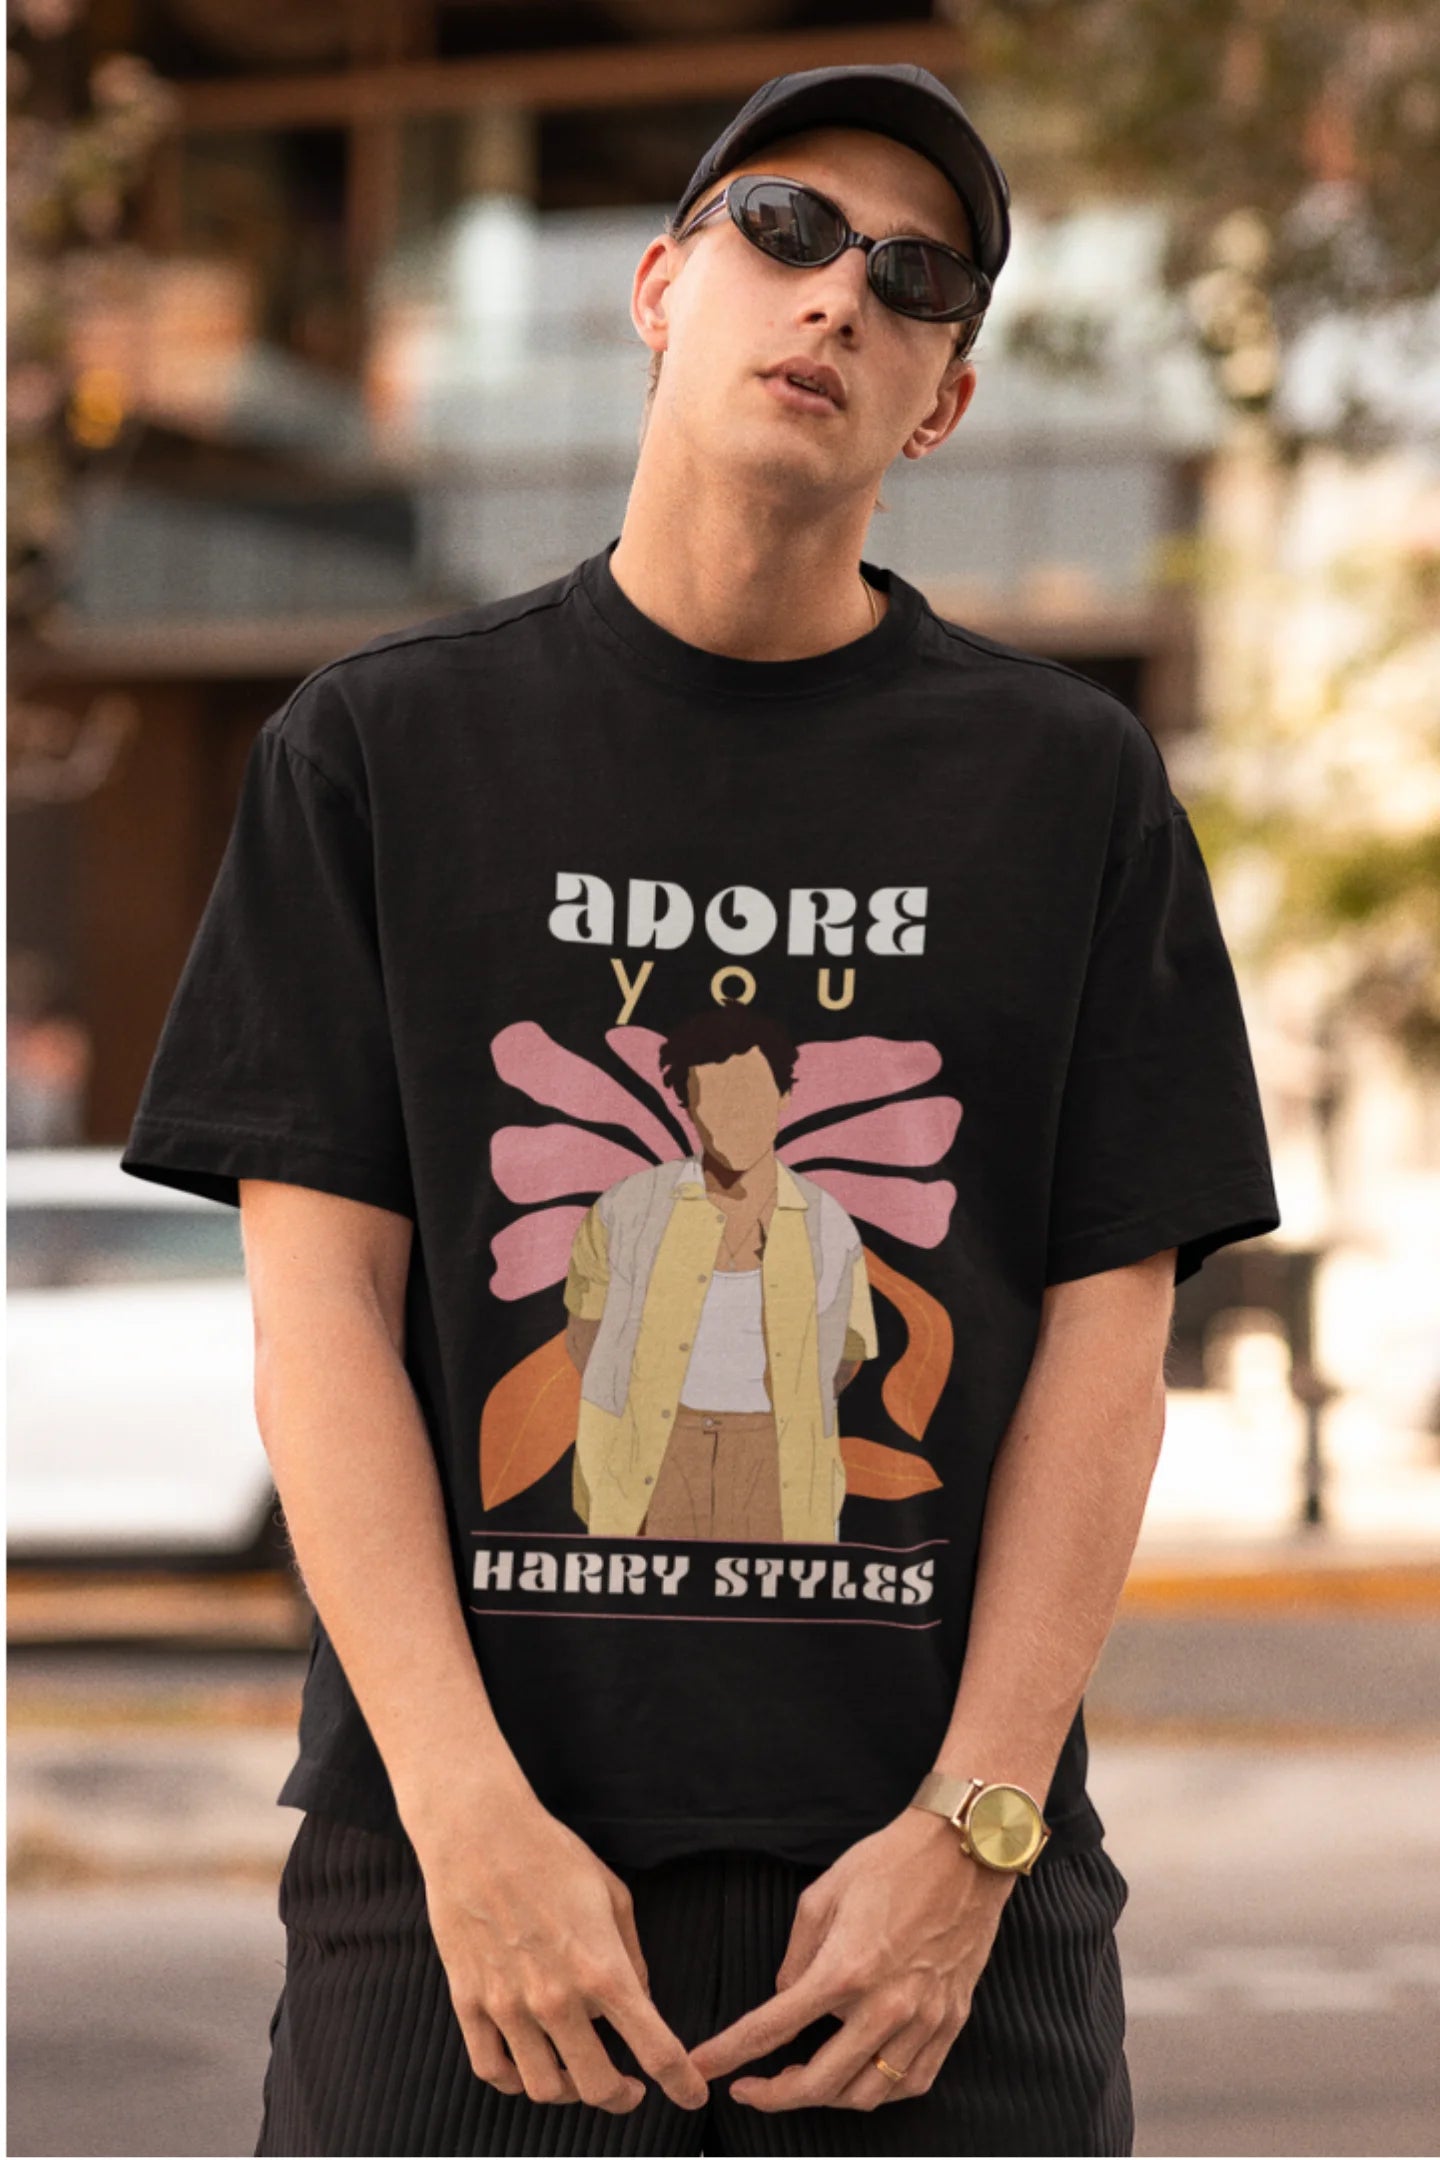 First image of man wearing black oversized t-shirt featuring 'Adore You' inspired design - ideal for fans of Harry Styles and One Direction